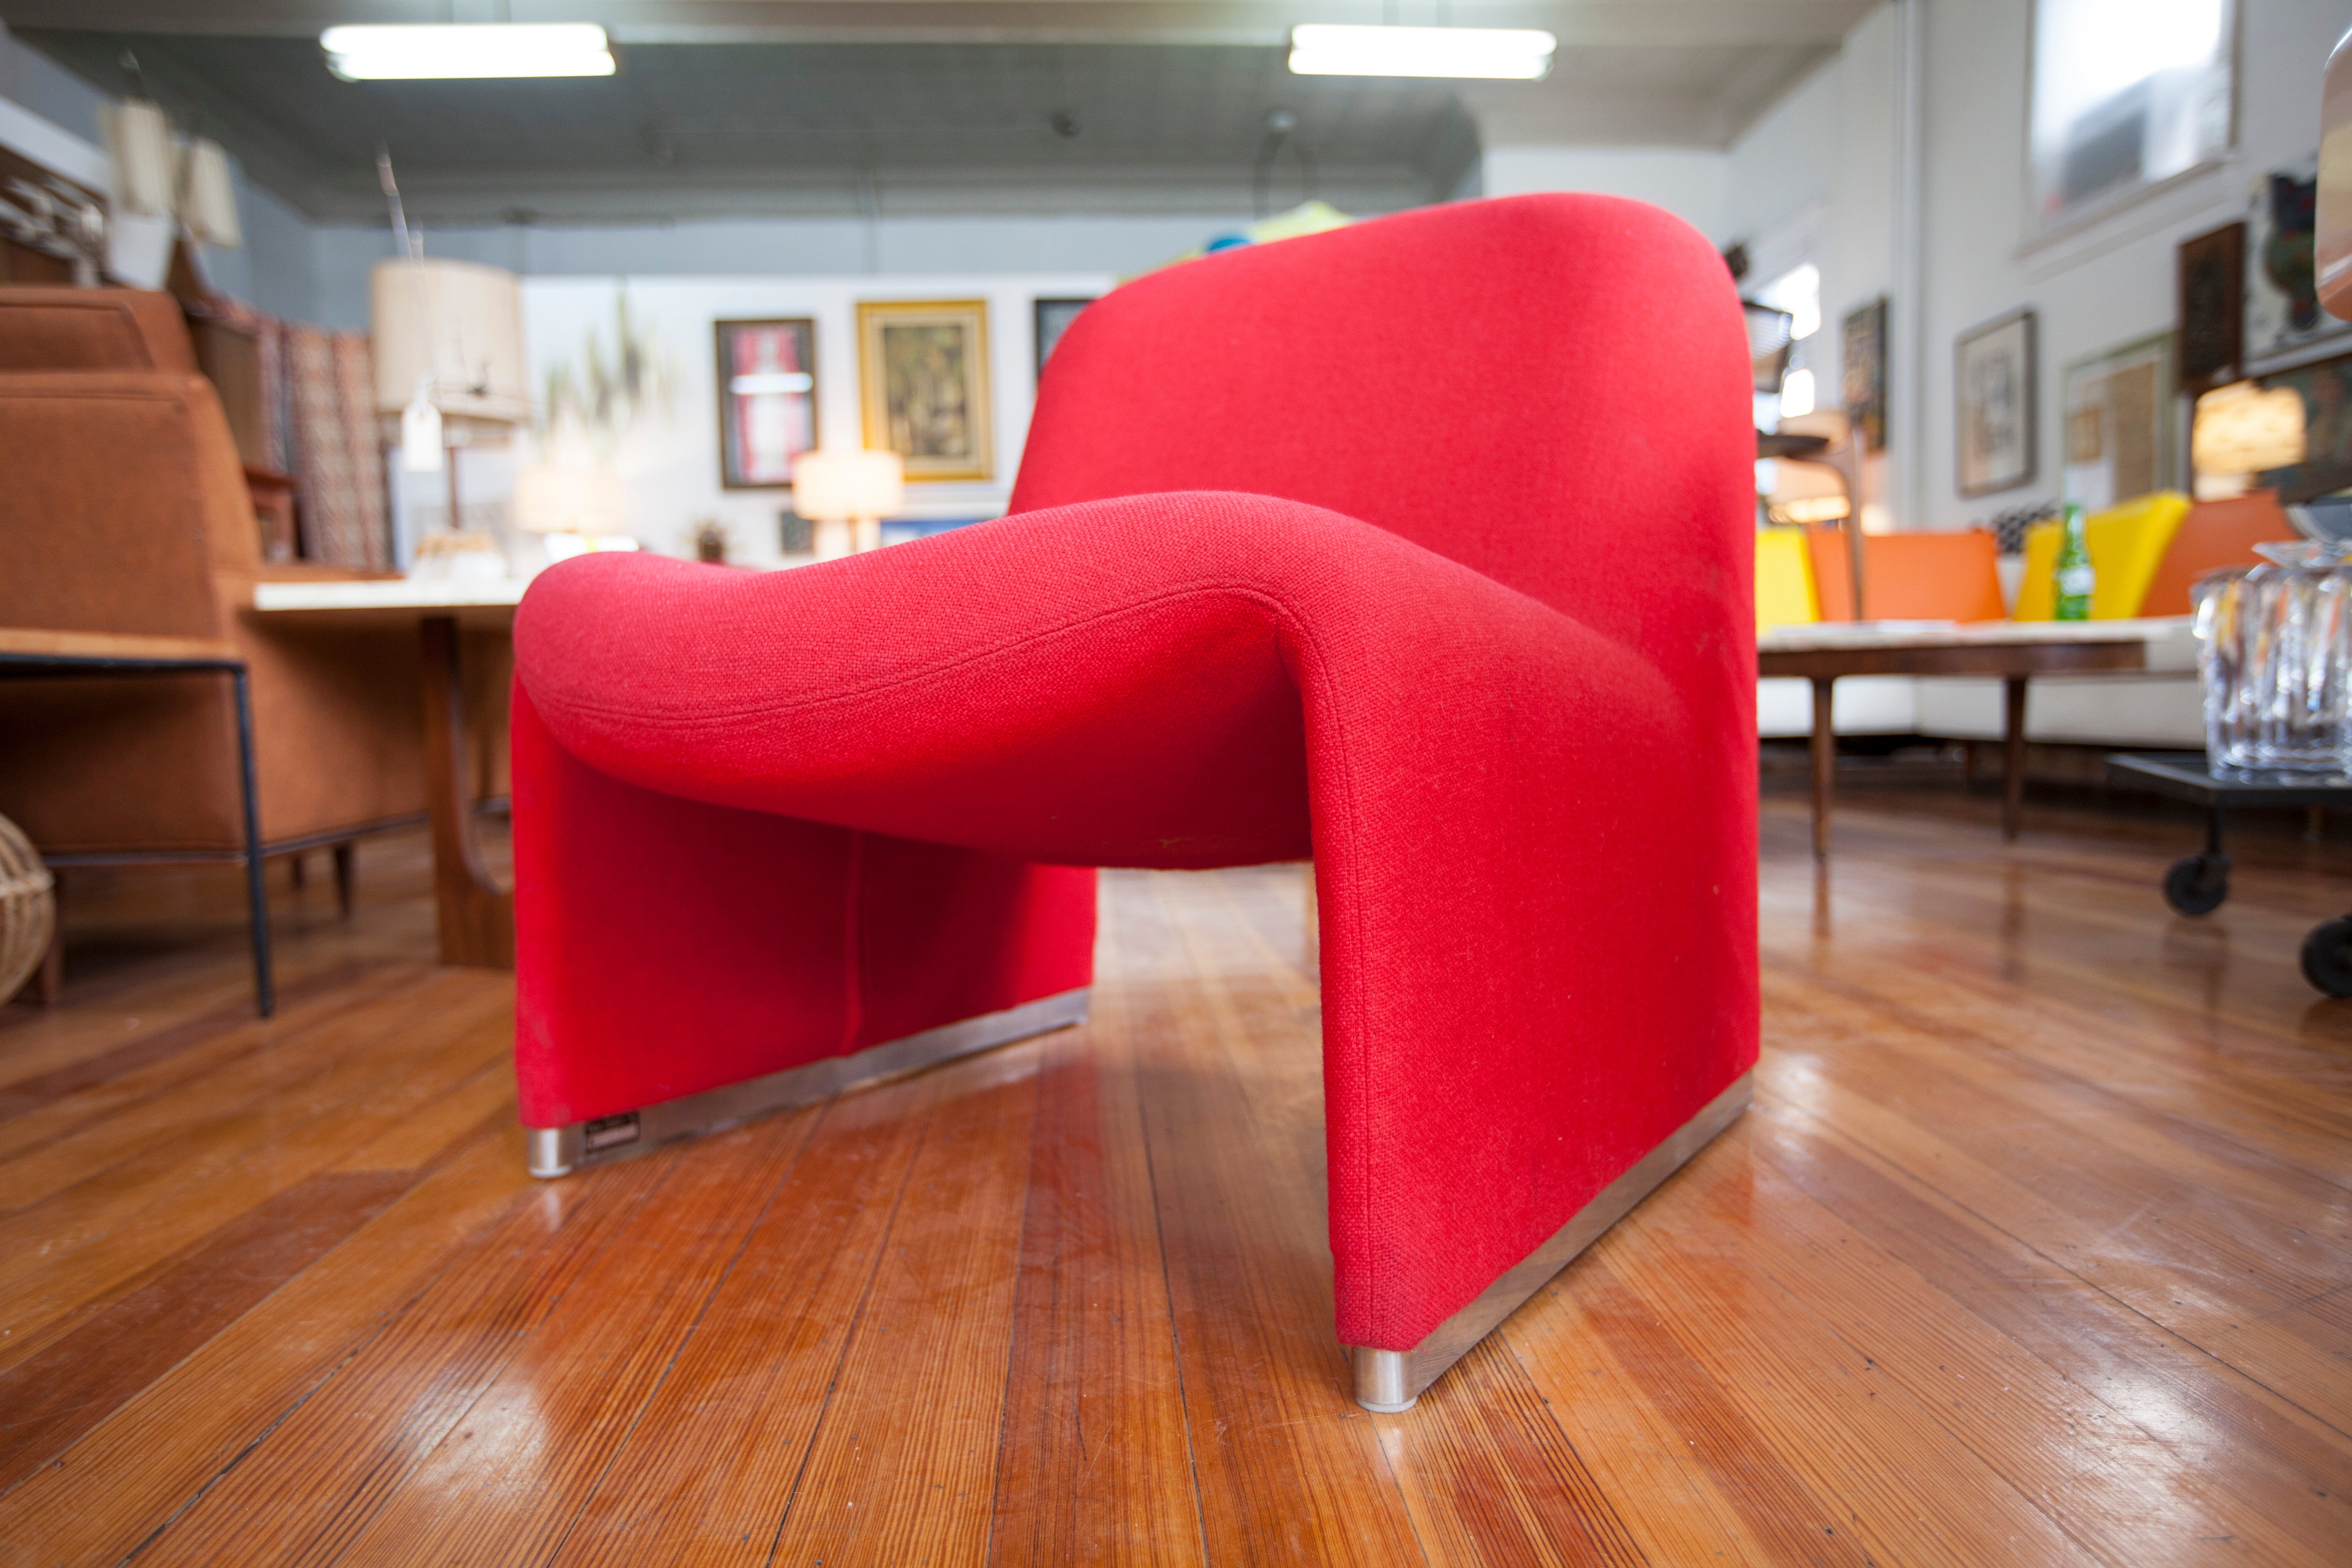 Four Red "Alky" Chairs by Giancarlo Piretti for Castelli  